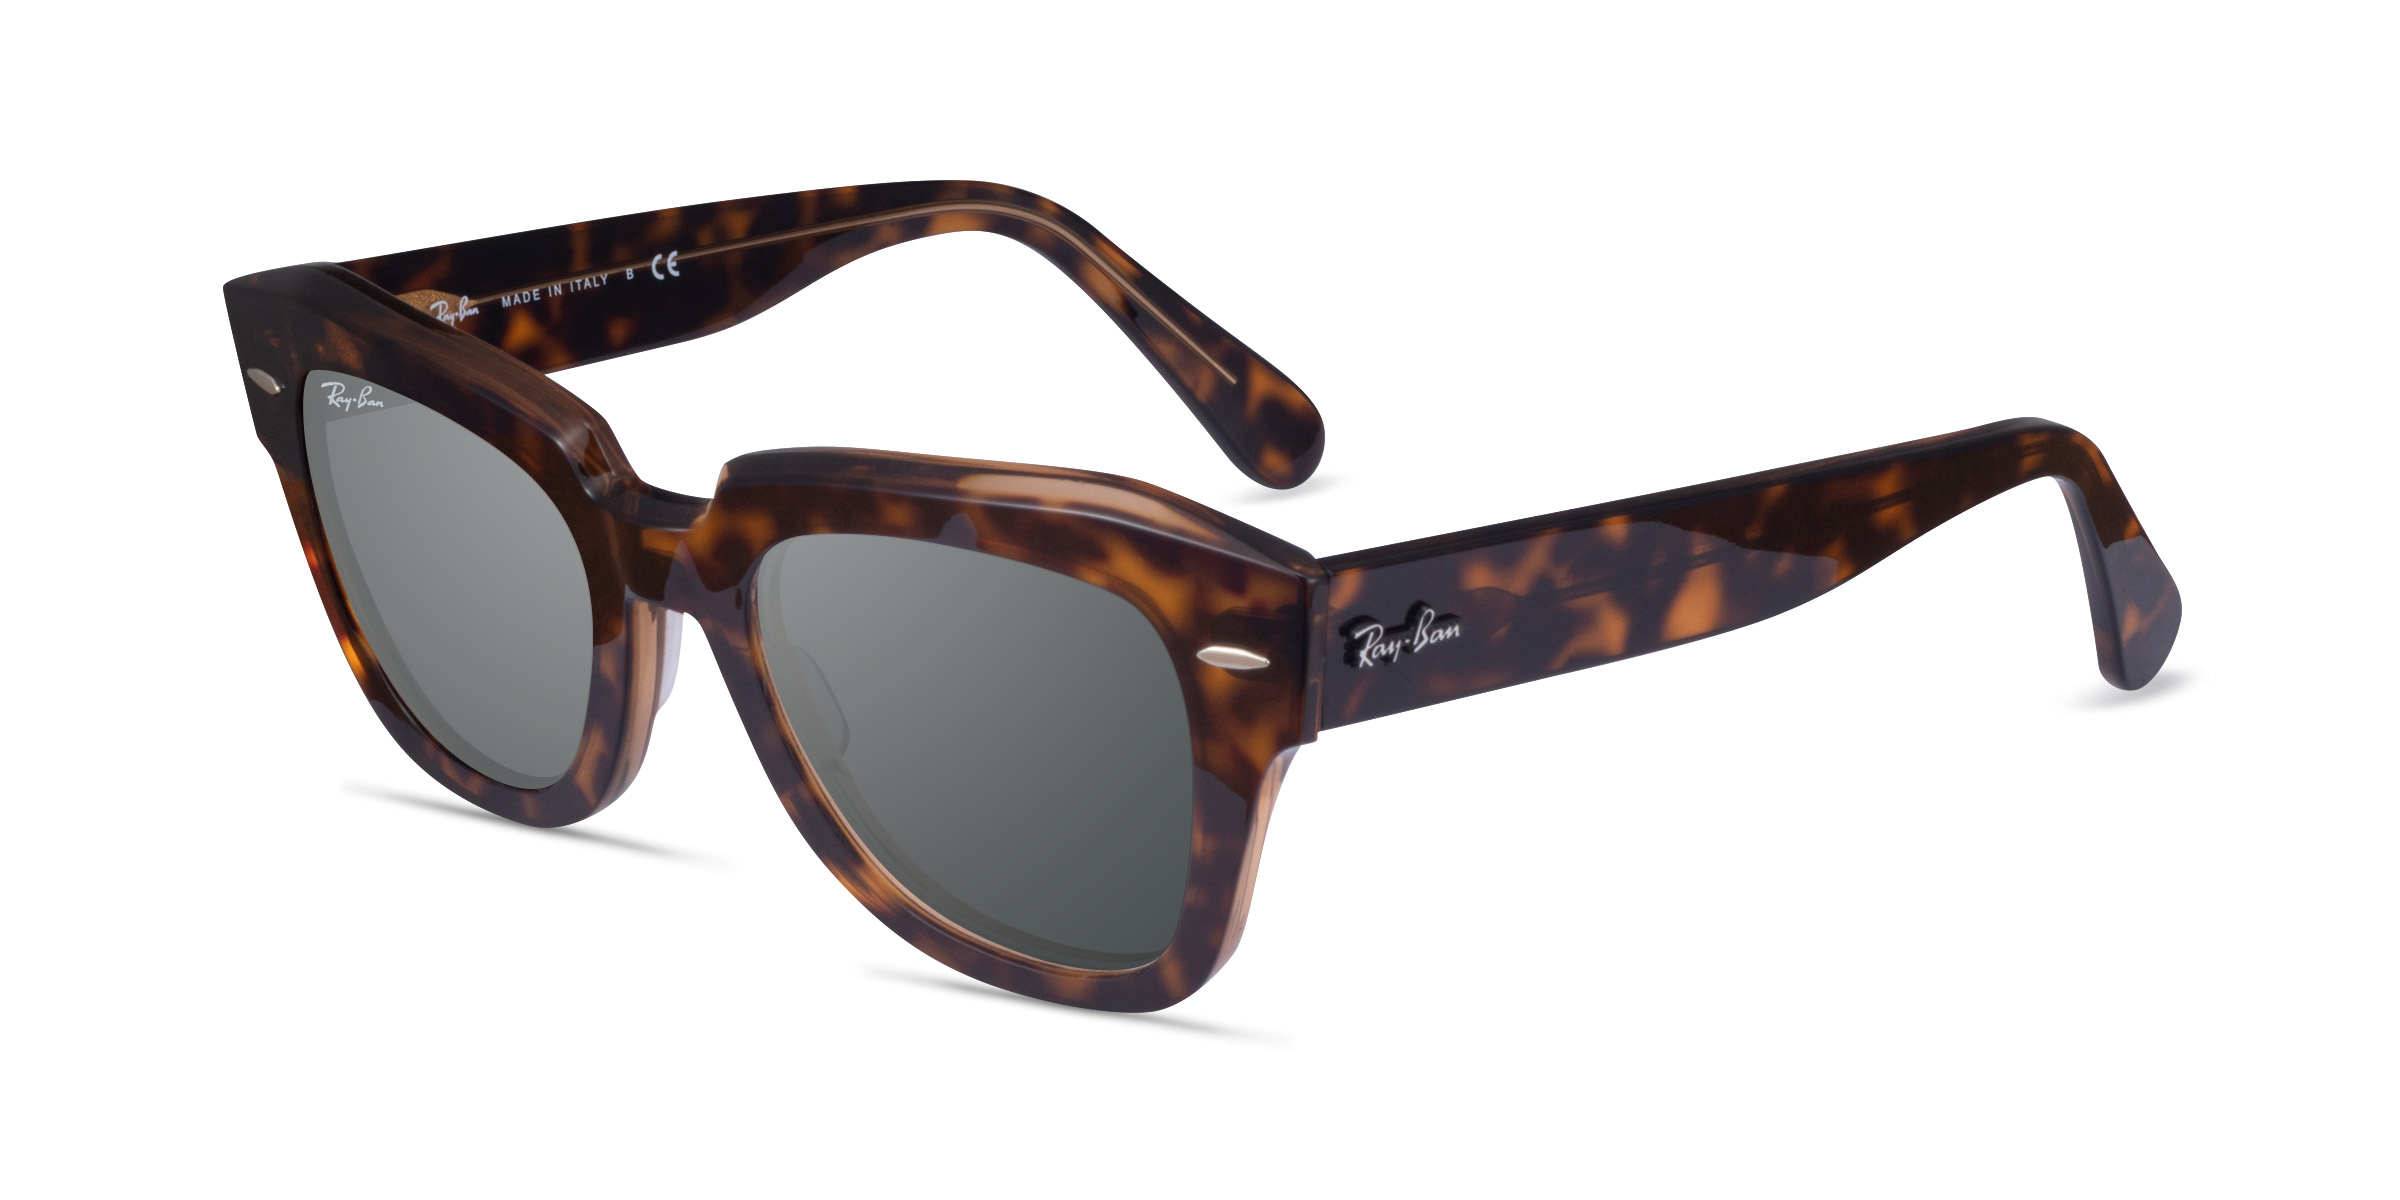 Ray-Ban State Street - Square Havana On Transparent Brown Frame ...